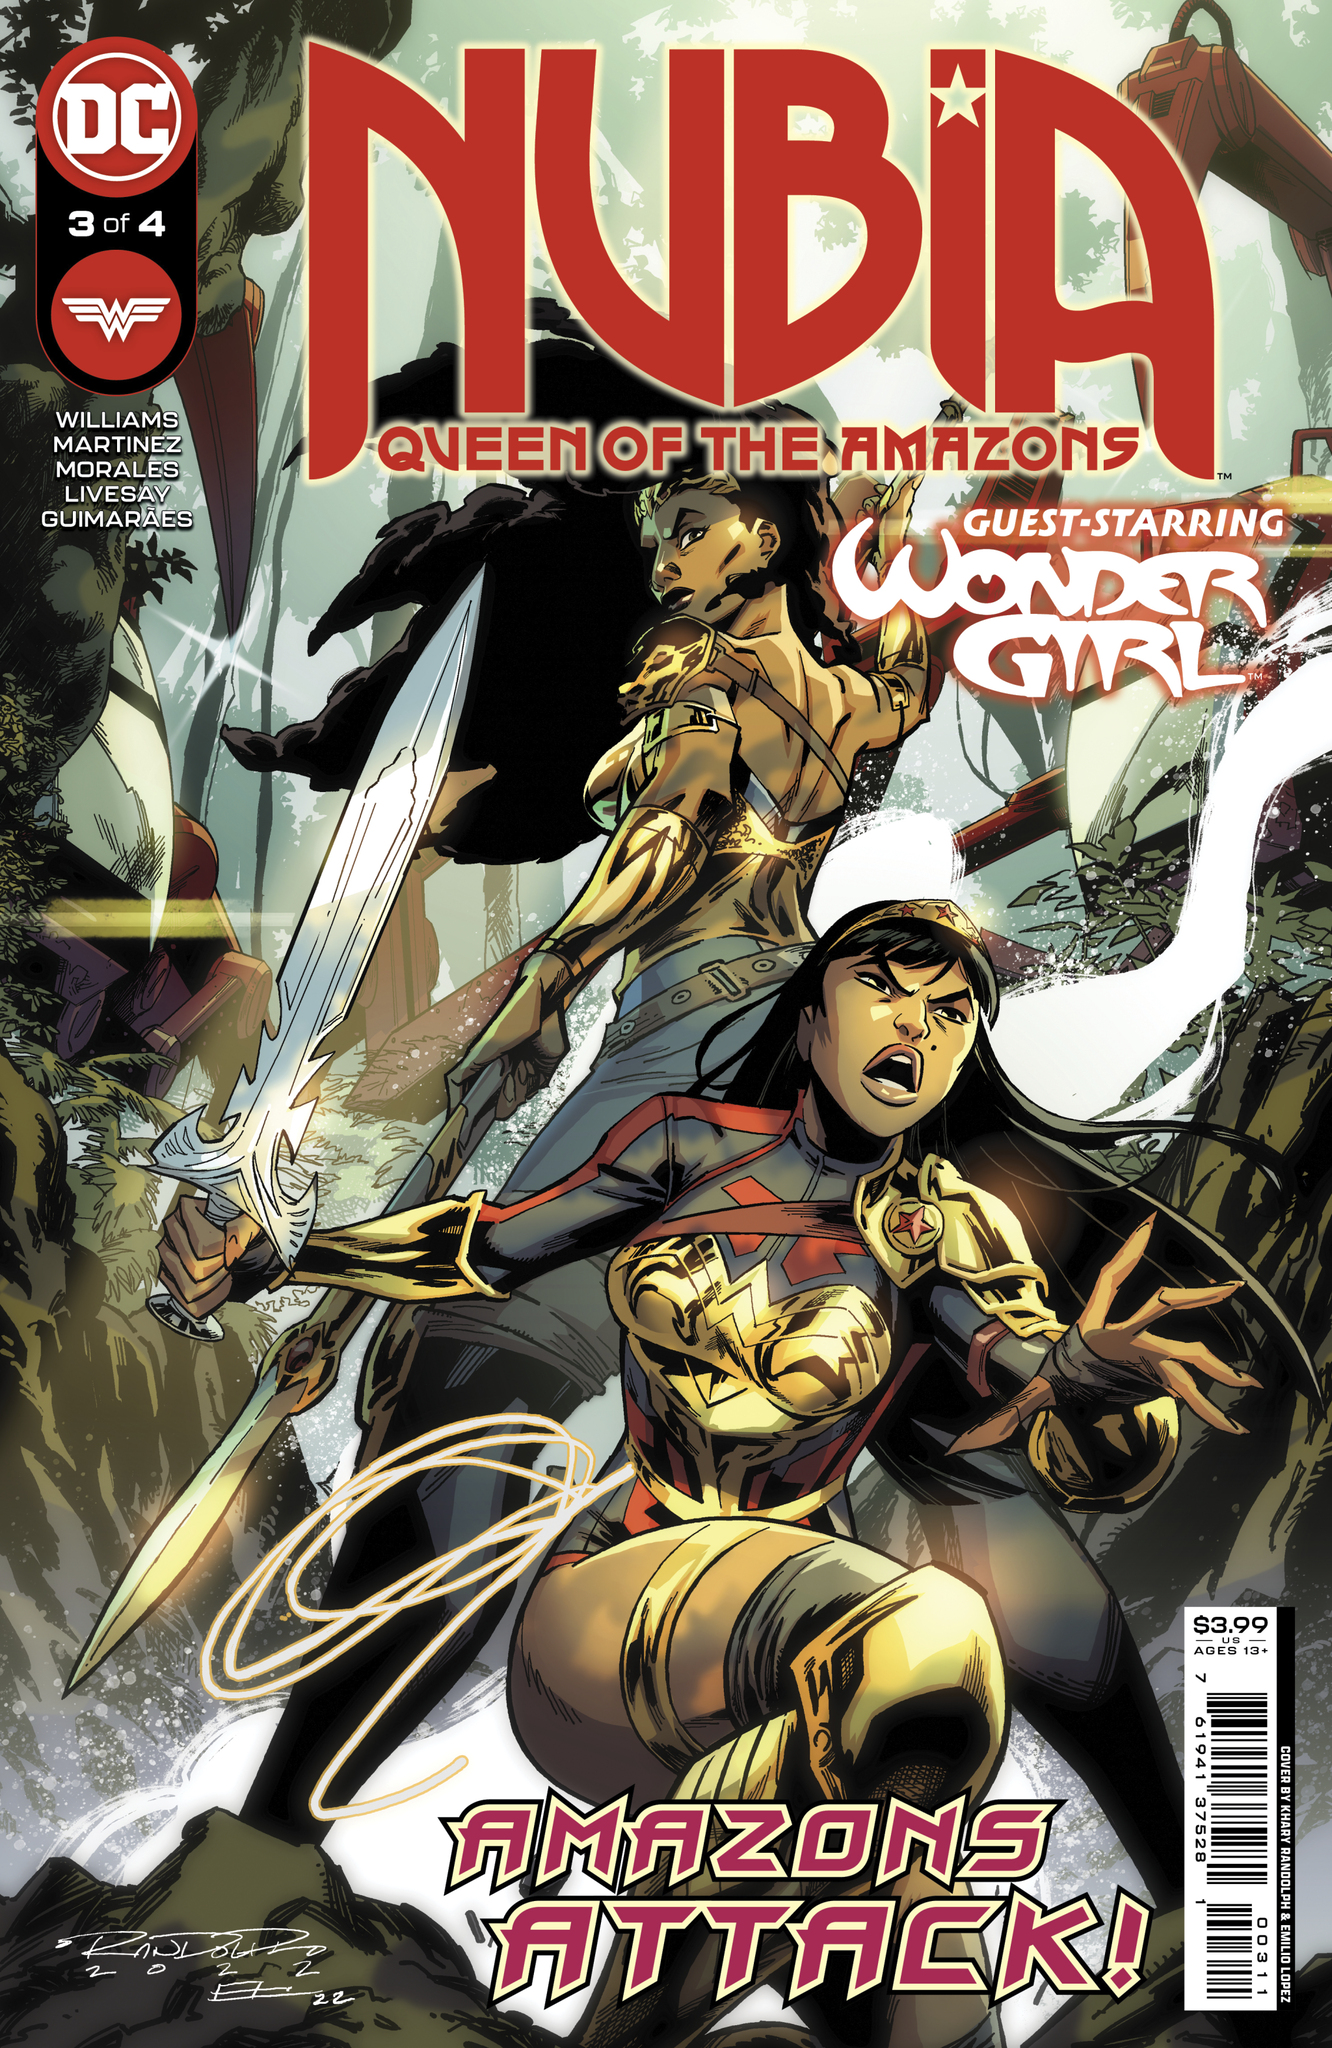 Nubia Queen of the Amazons #3 Cover A Khary Randolph (Of 4)